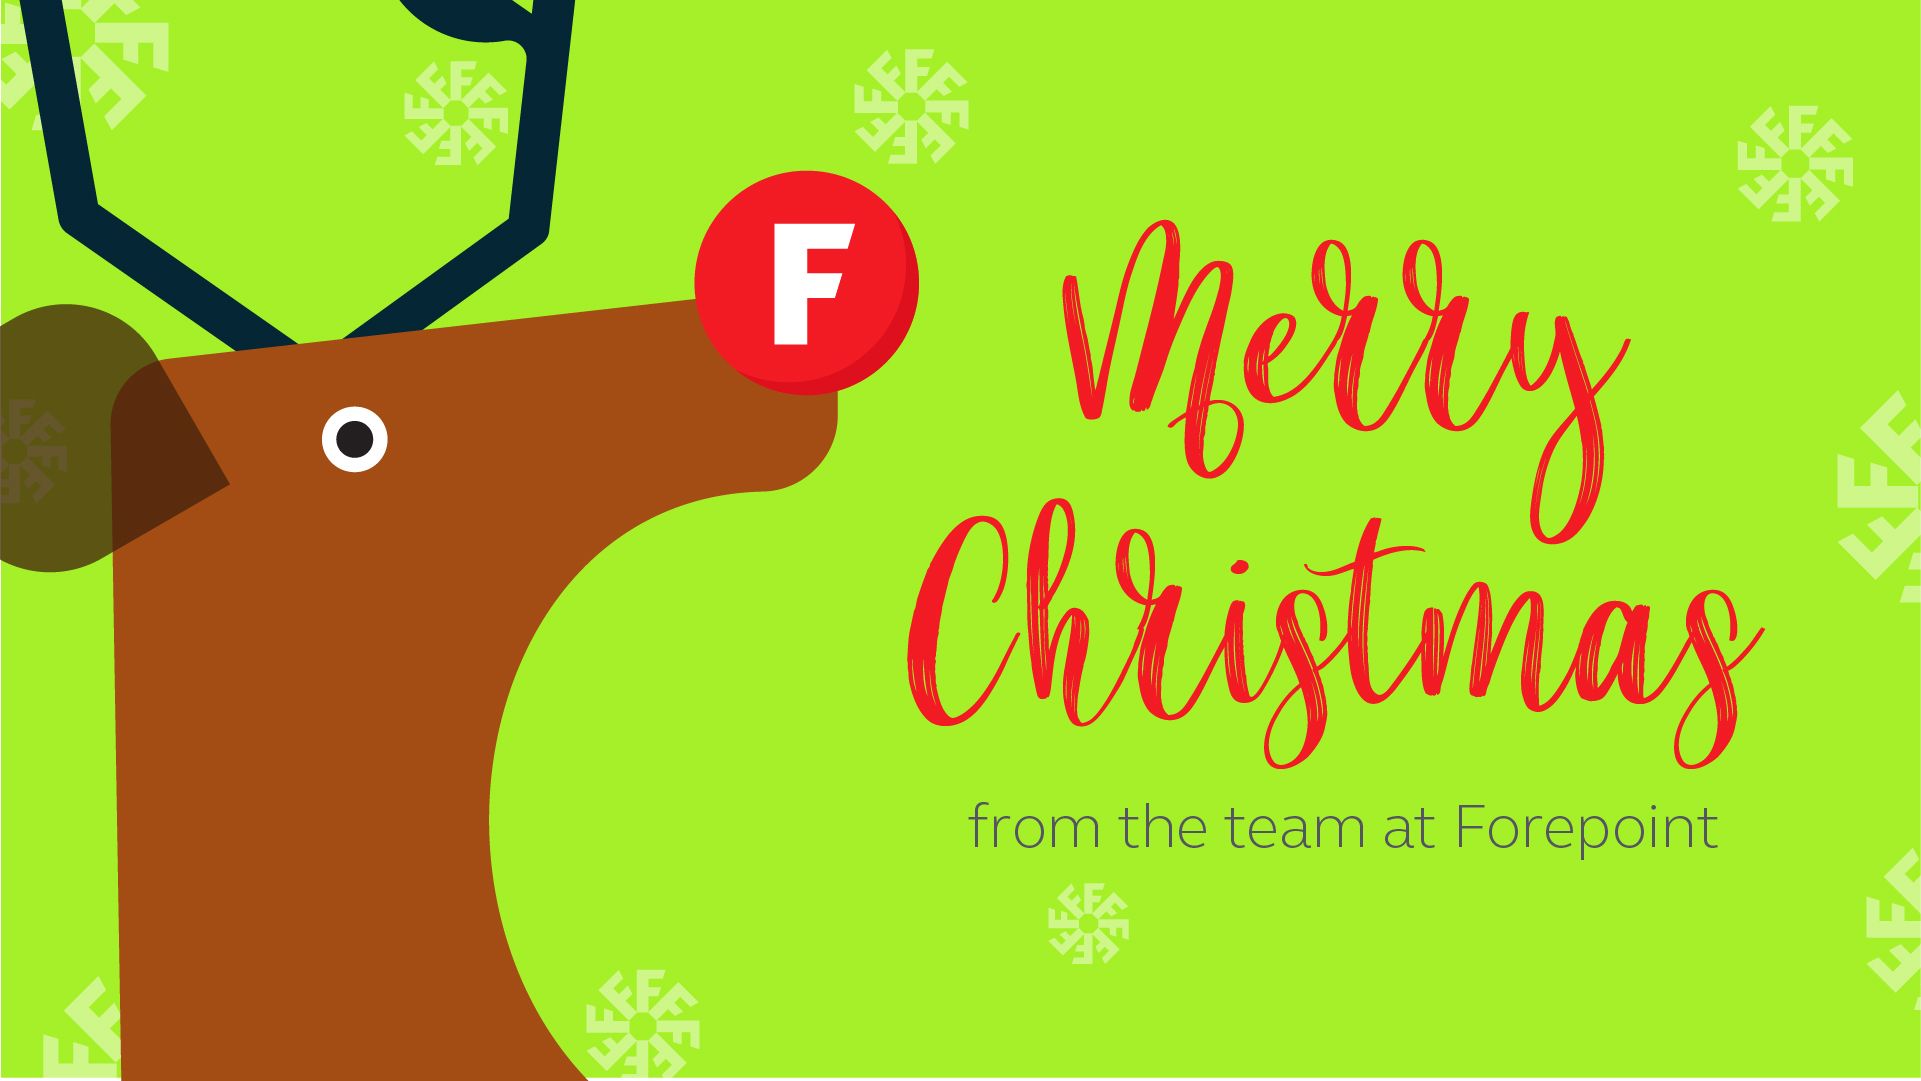 Forepoint Christmas Greetings Banner 2021